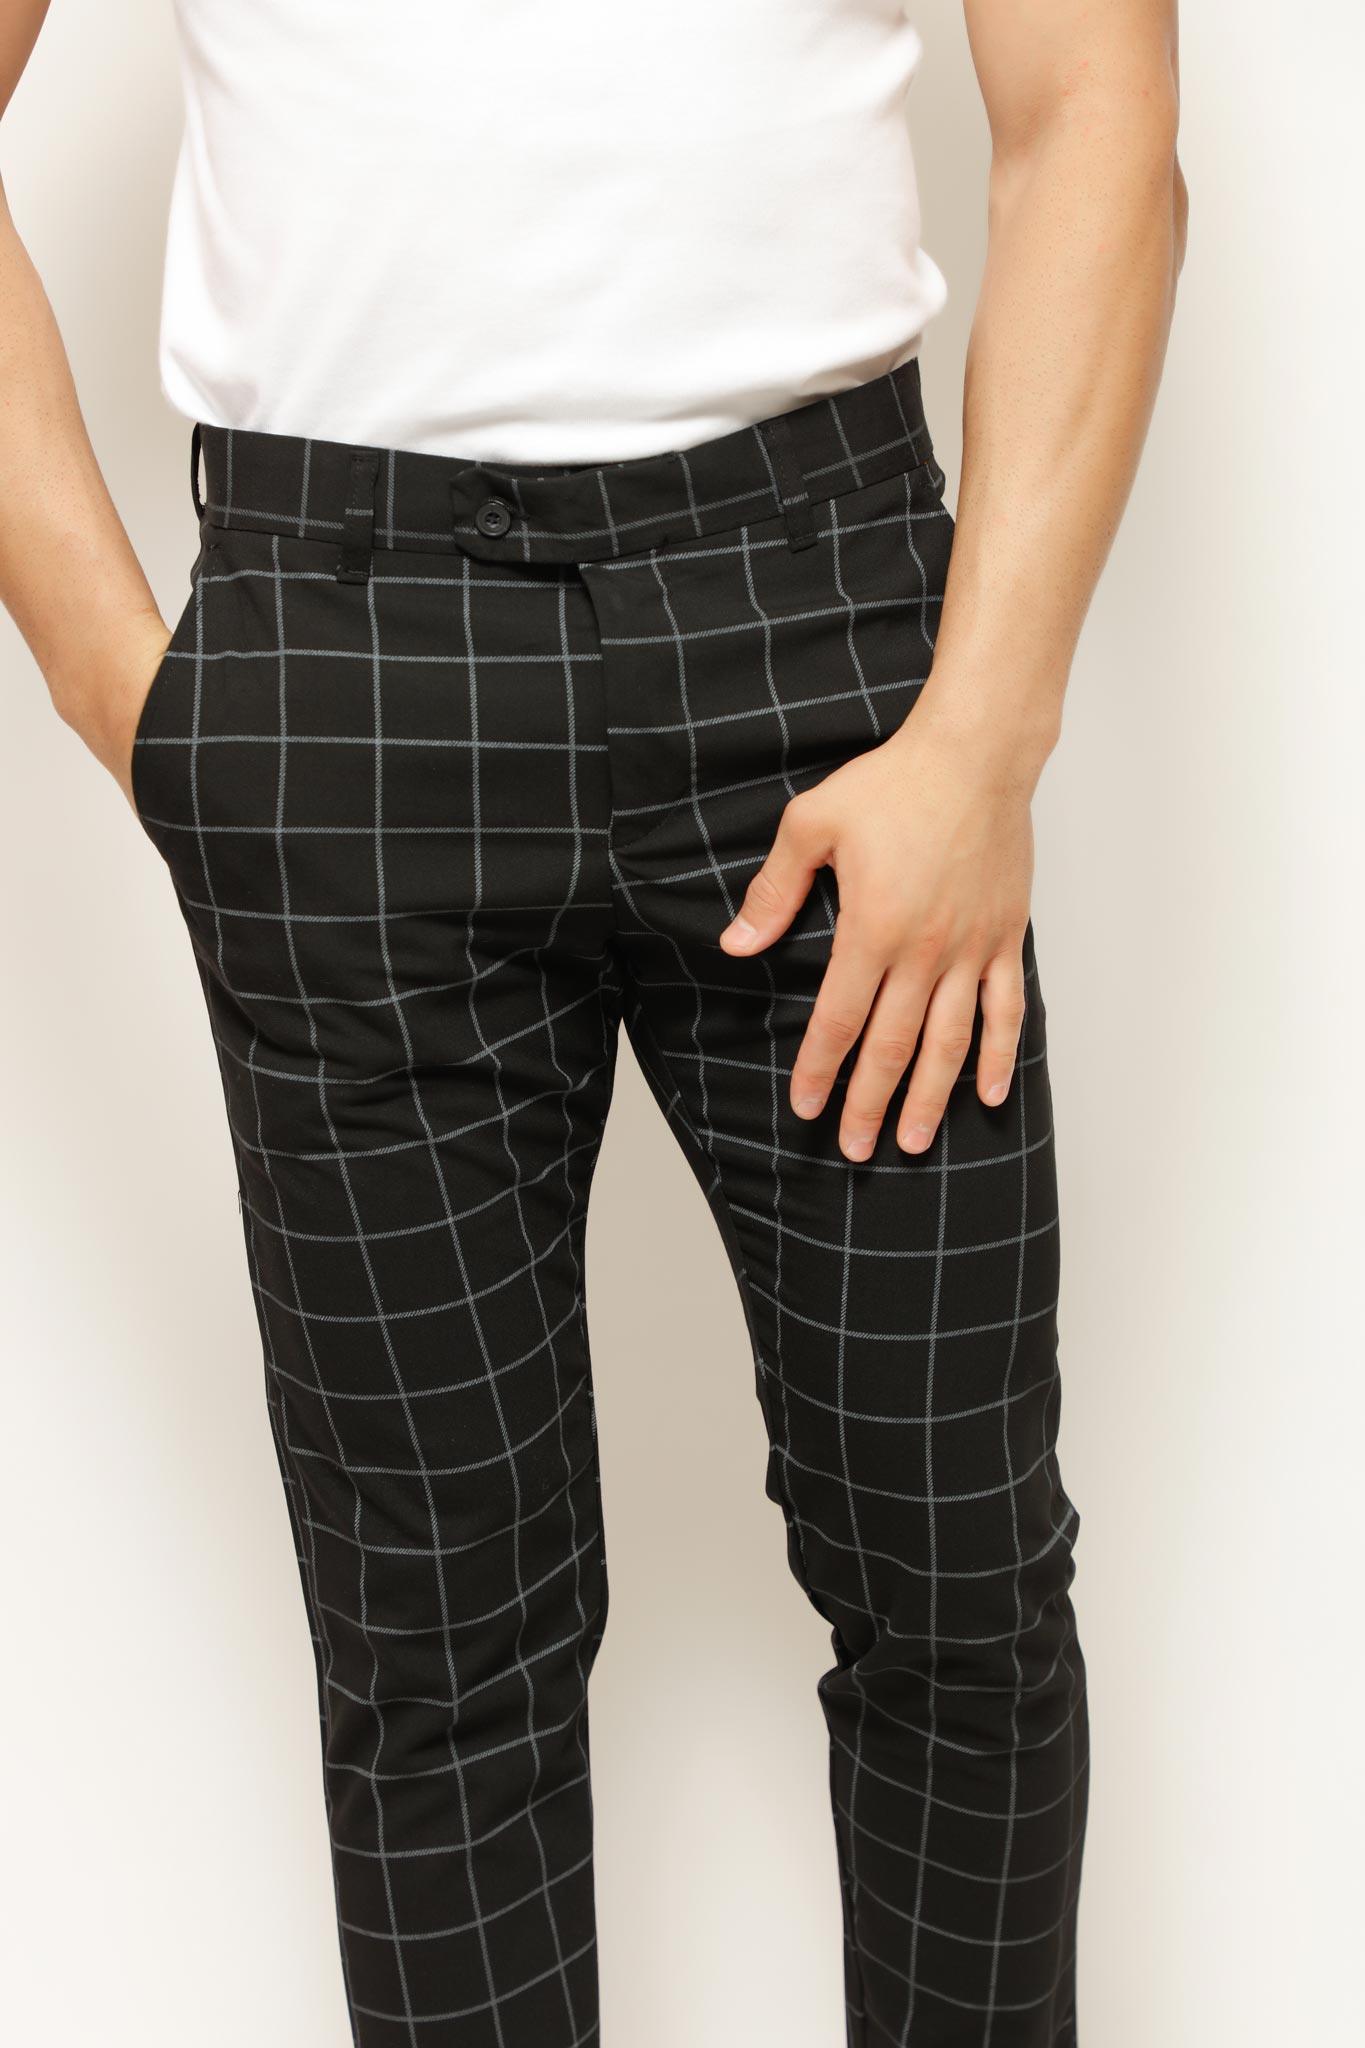 Skinny Fit Check Trousers Style Outfit - Your Average Guy